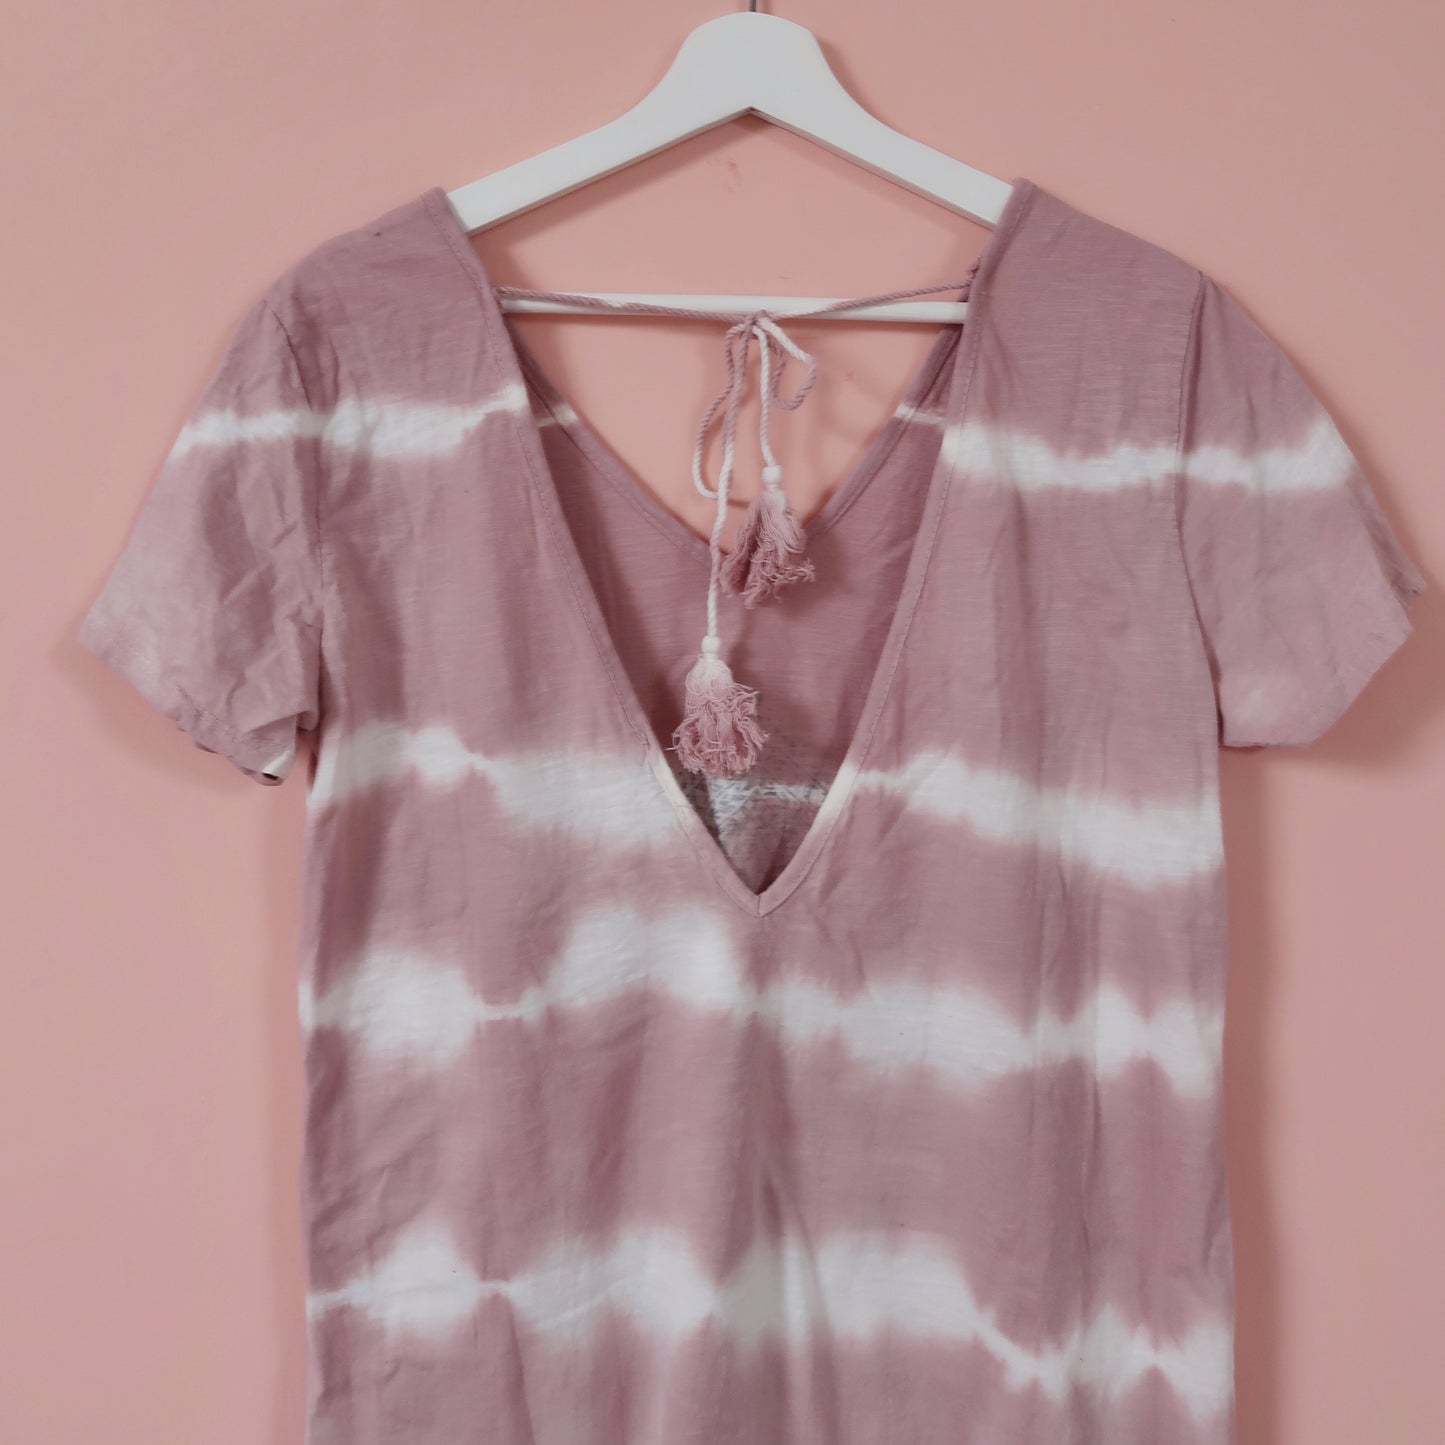 protect your energy tie dye dress - dusky pink